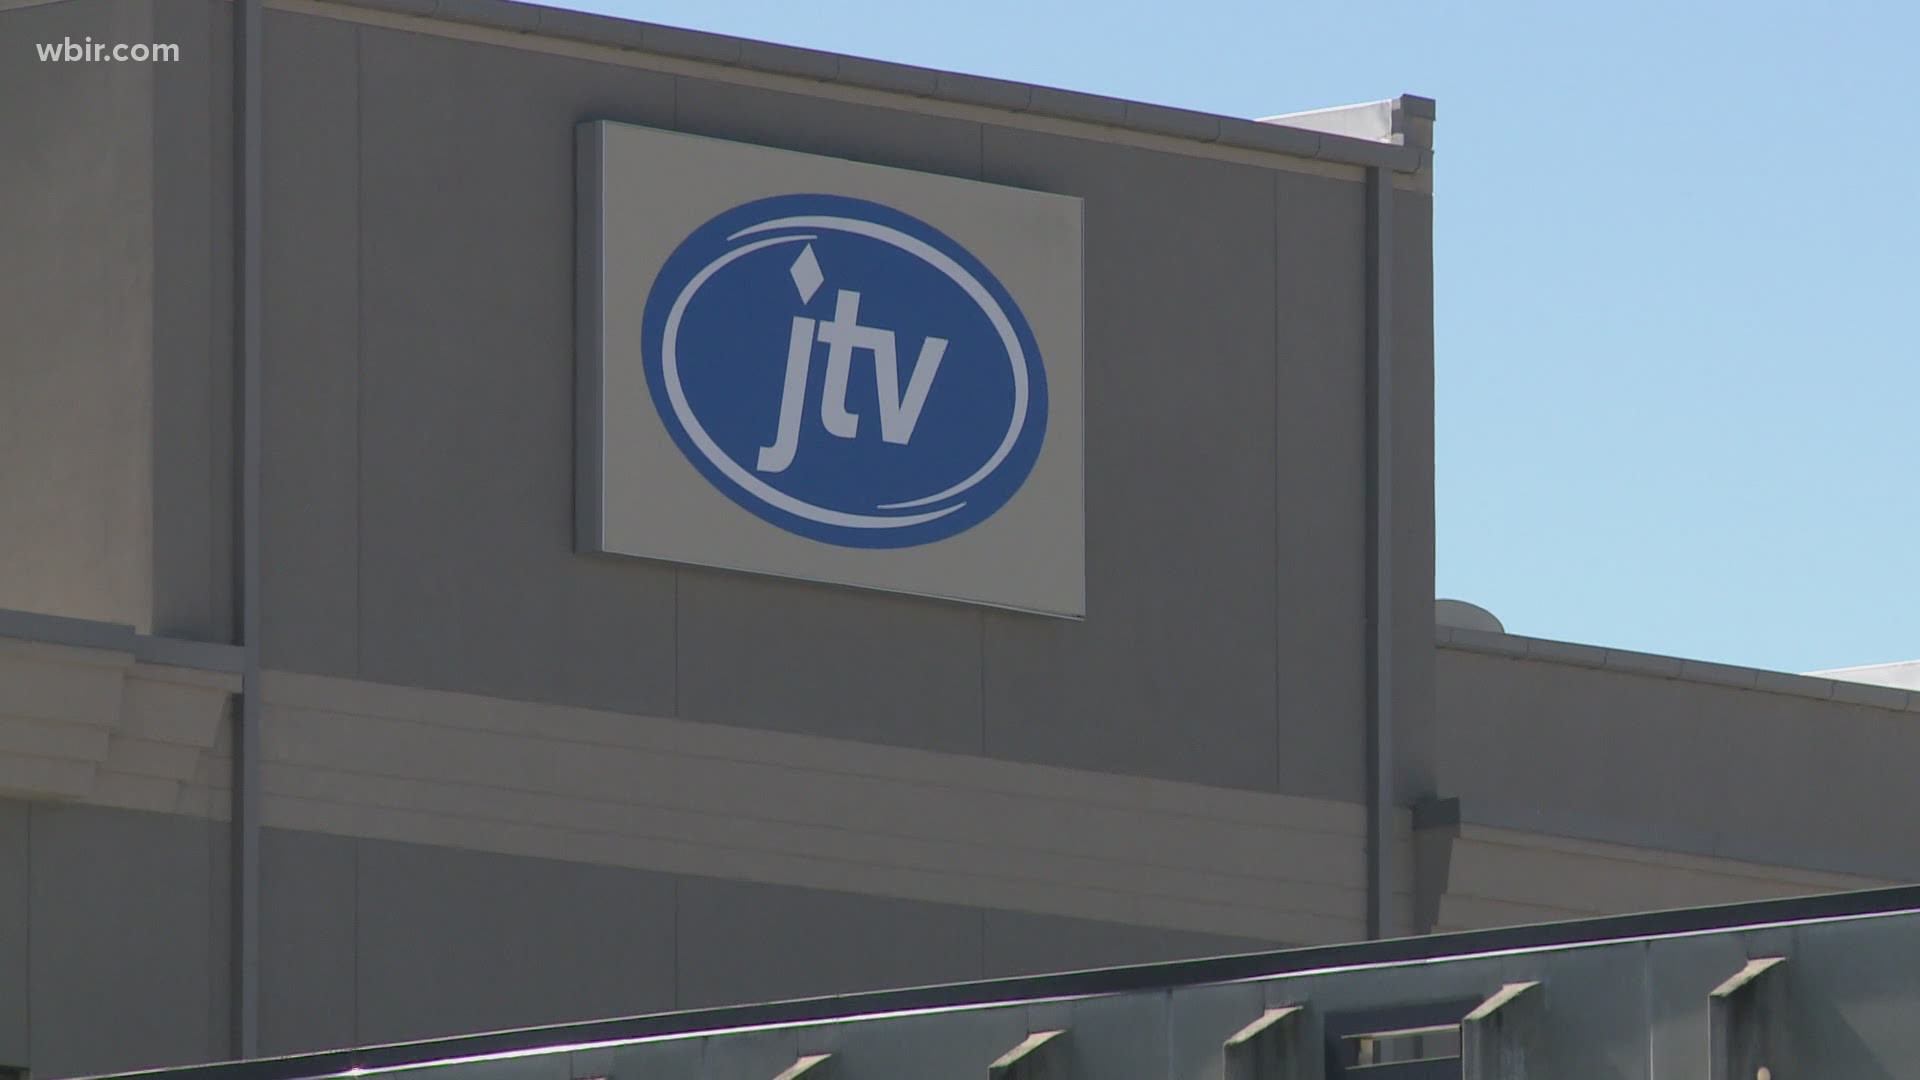 All affected employees will be supported with severance packages and guidance in their transition, according to CEO and JTV President Tim Matthews.